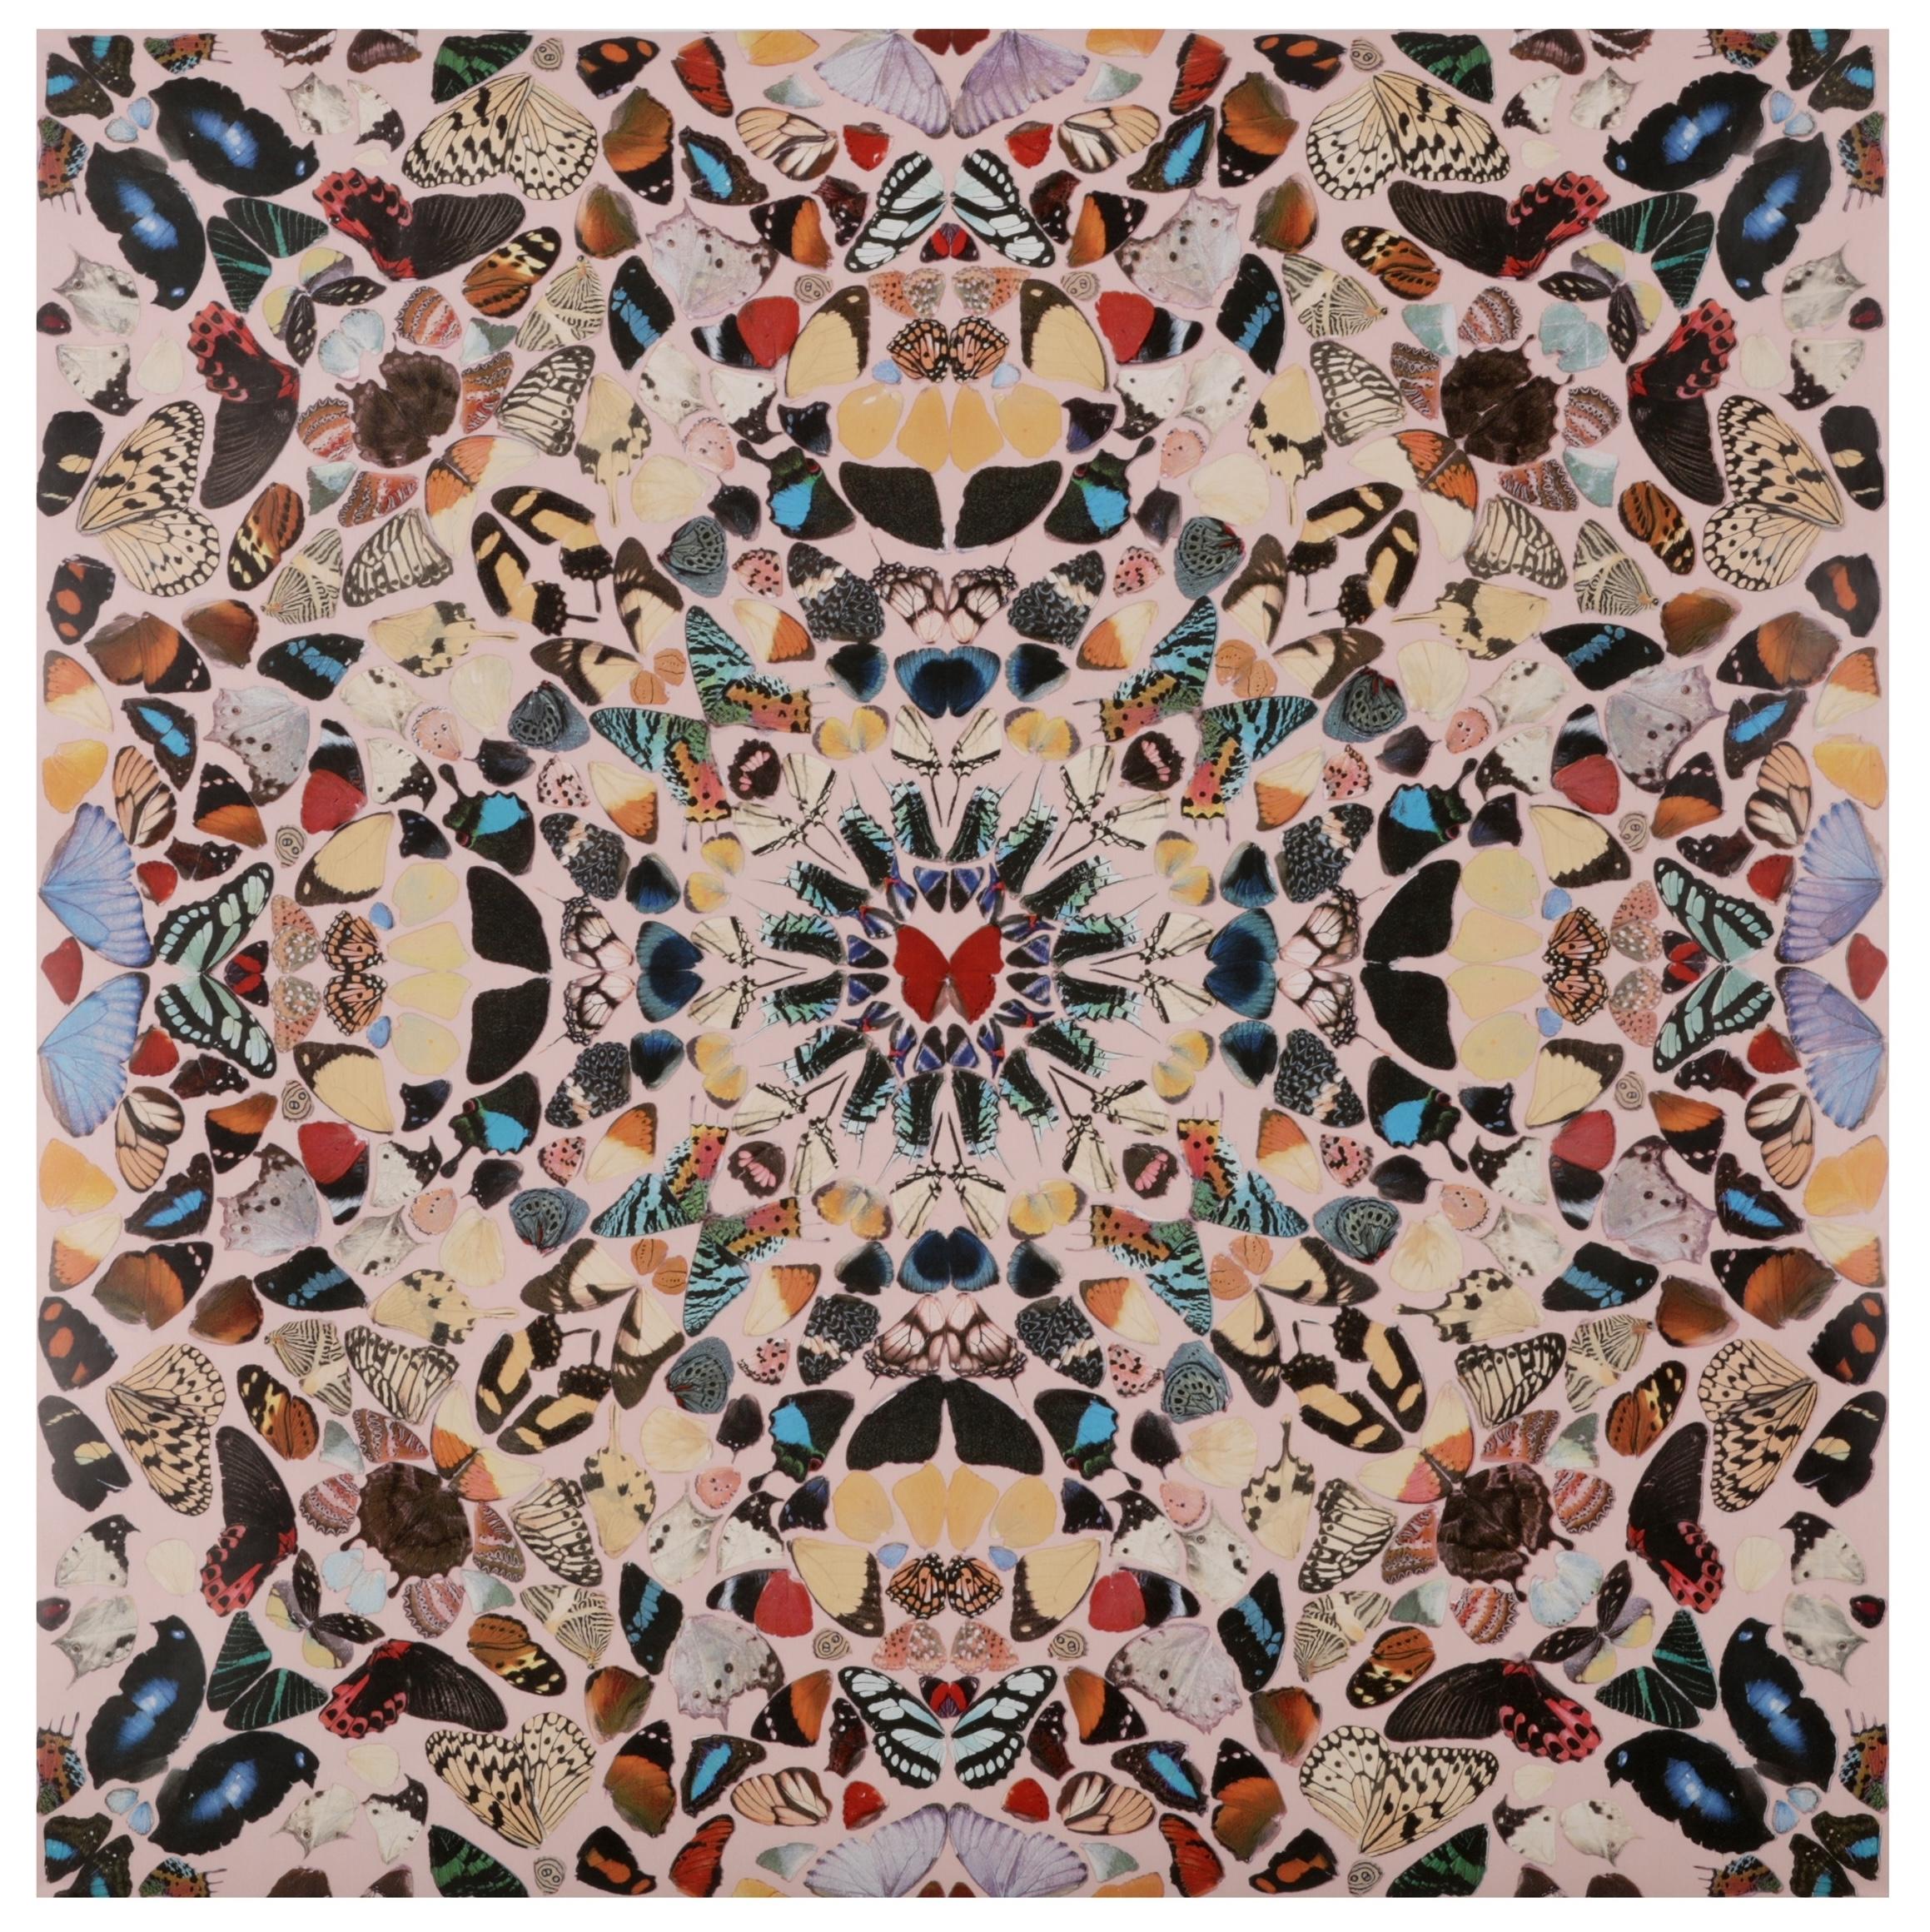 Unframed Damien Hirst Butterfly Kaleidoscope Wallpaper, 2004 UK In Excellent Condition For Sale In Los Angeles, CA